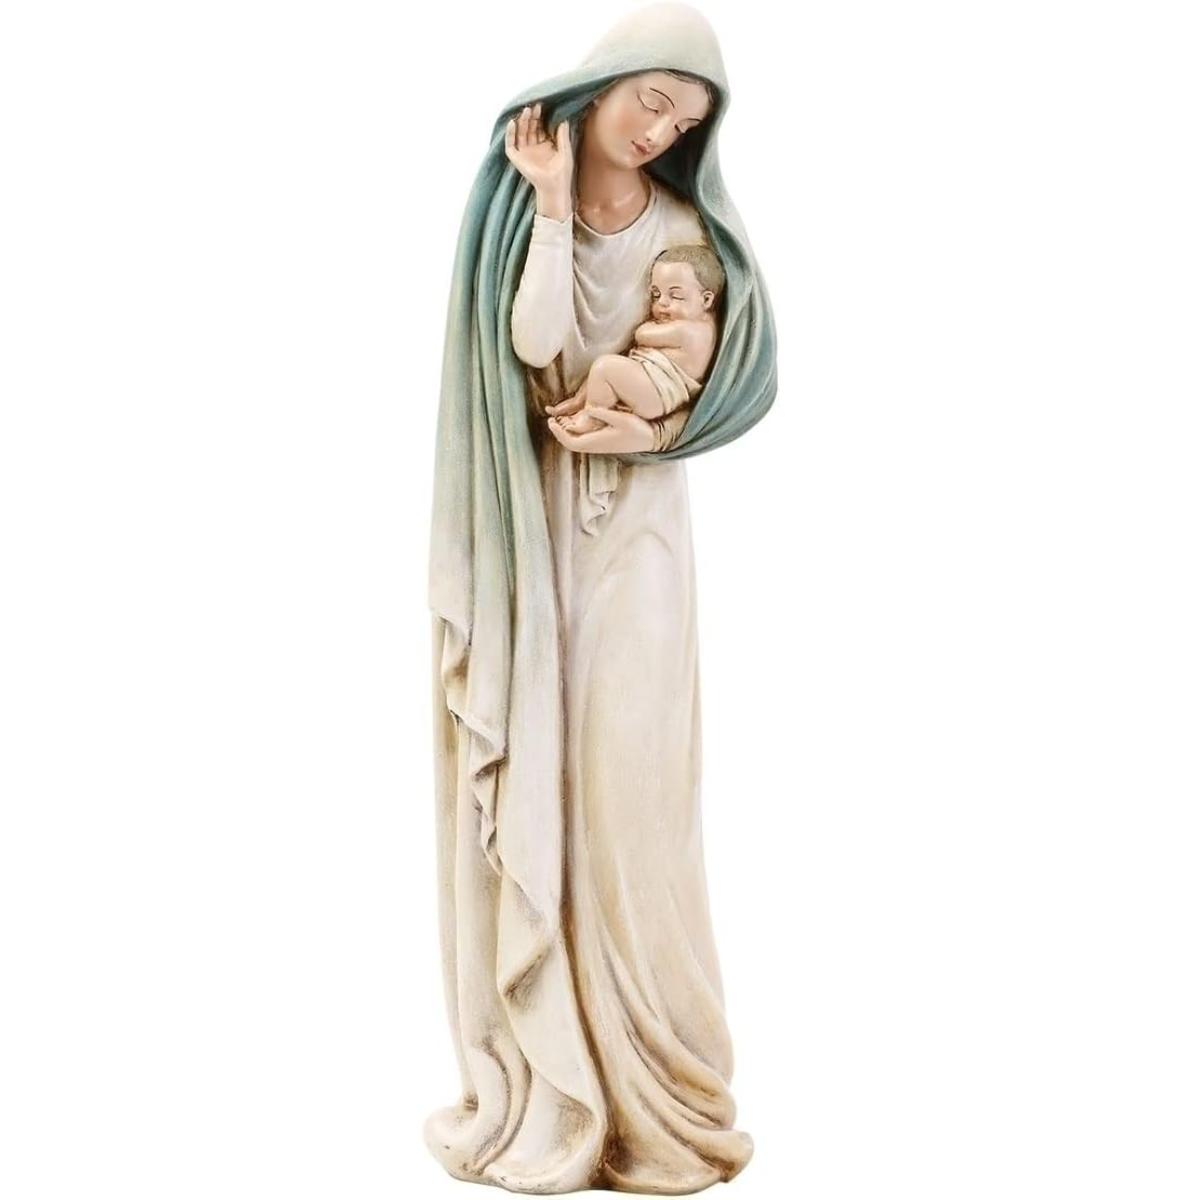 Statues of the Virgin Mary